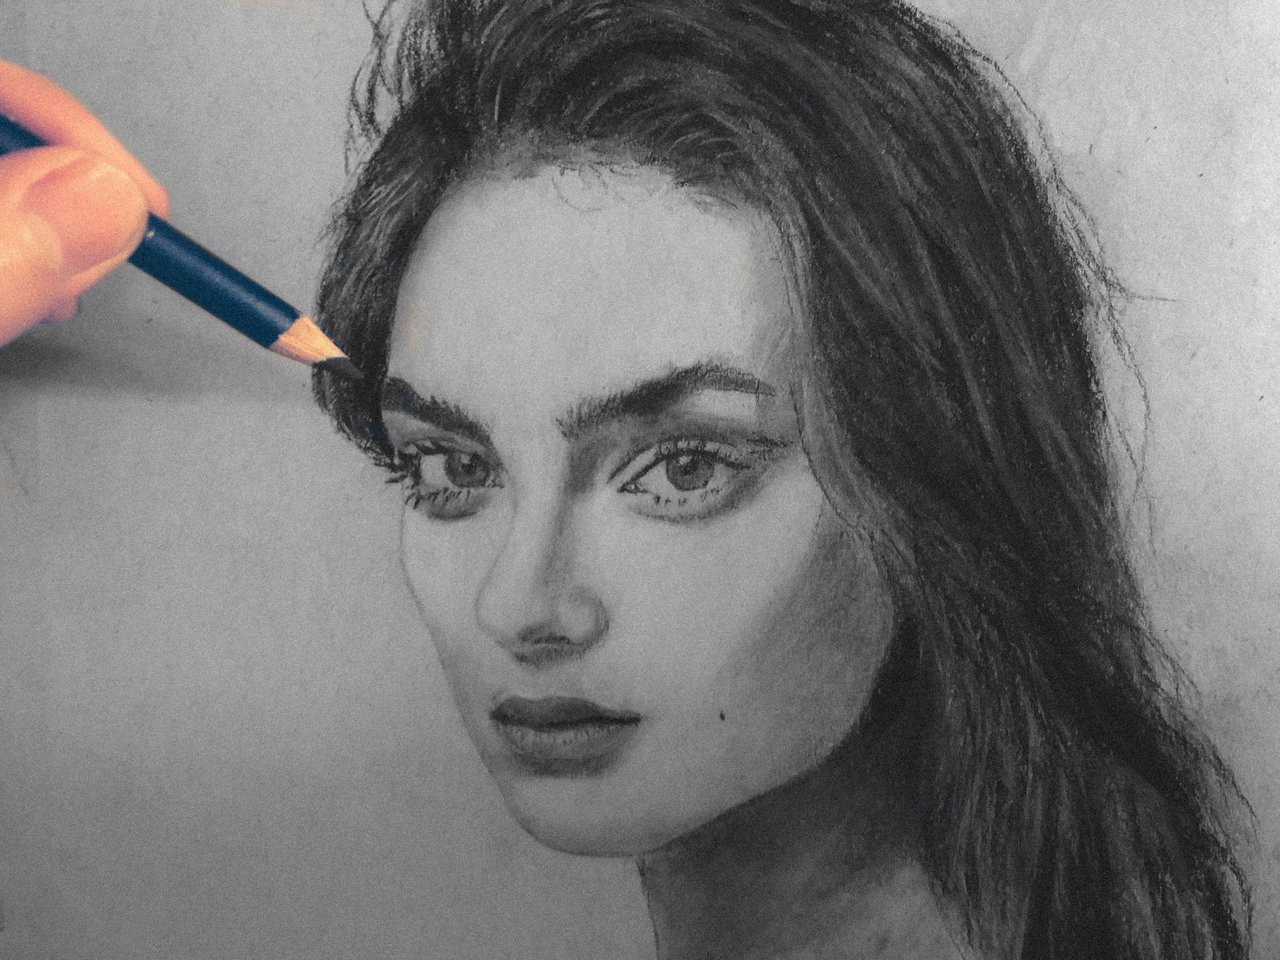 REALISTIC DRAWING  GIRL DRAWING  WOMAN DRAWING  LADY DR  Flickr